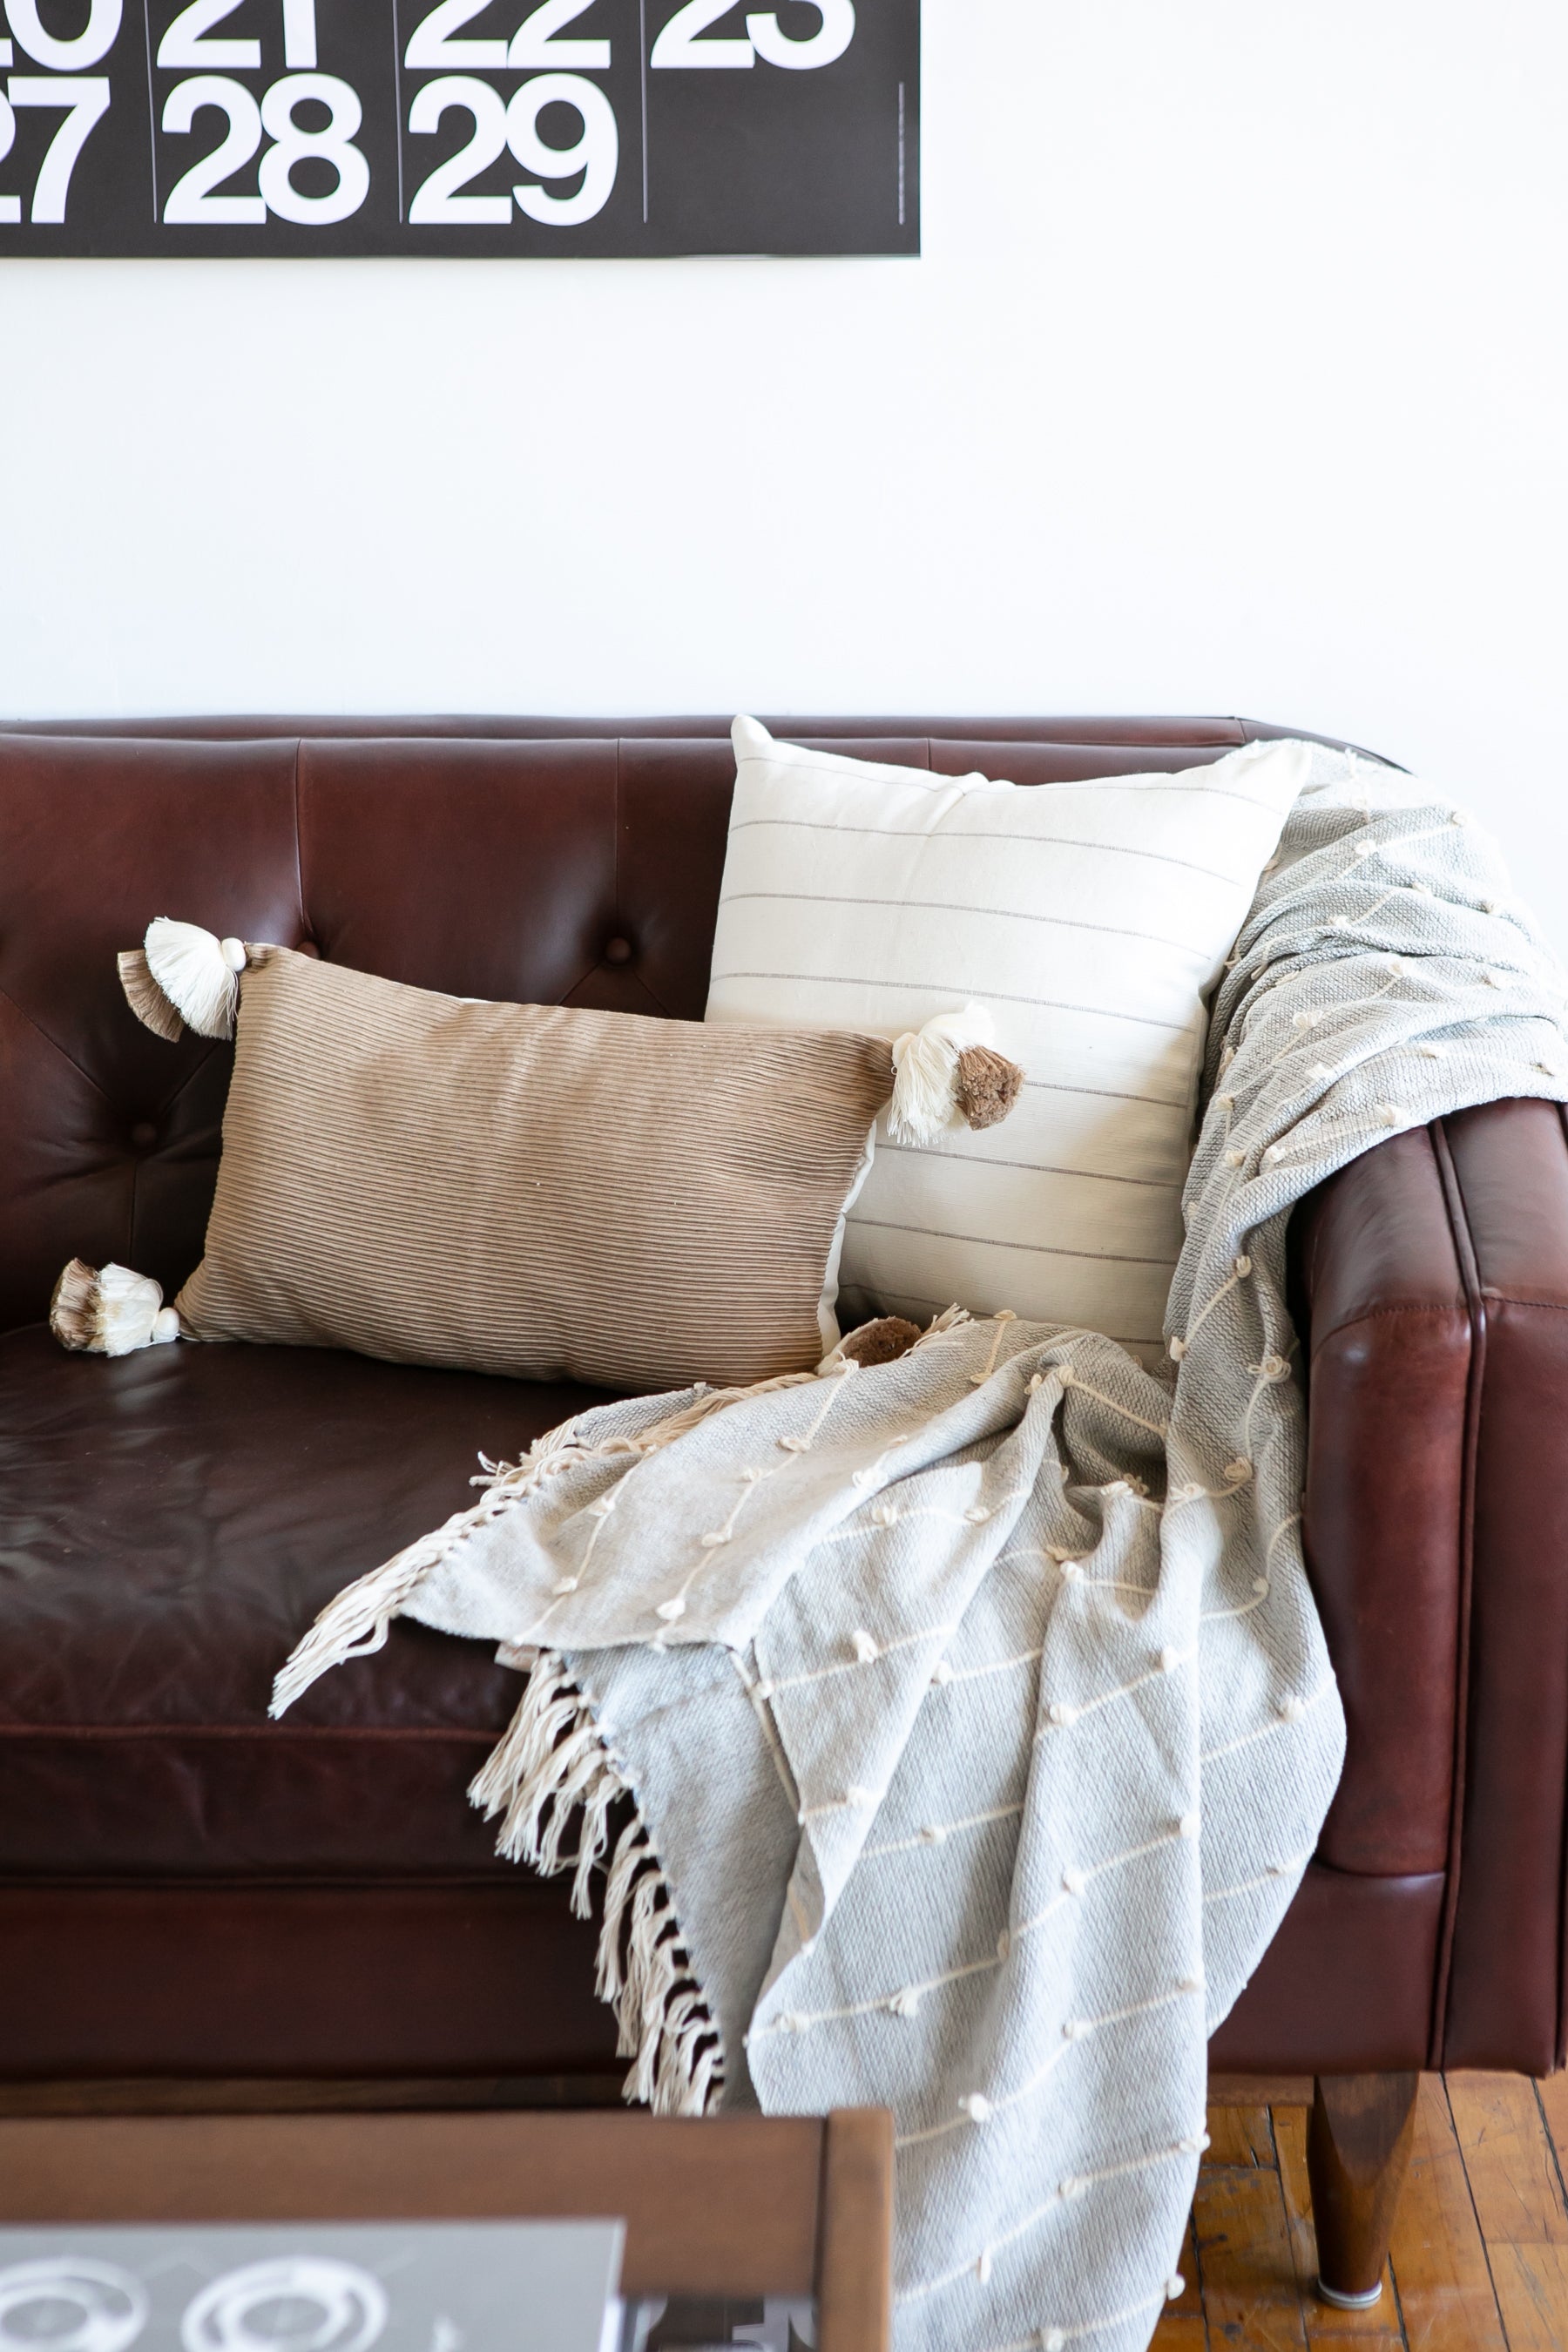 How to Style Your Sofa - 3 Easy Ways